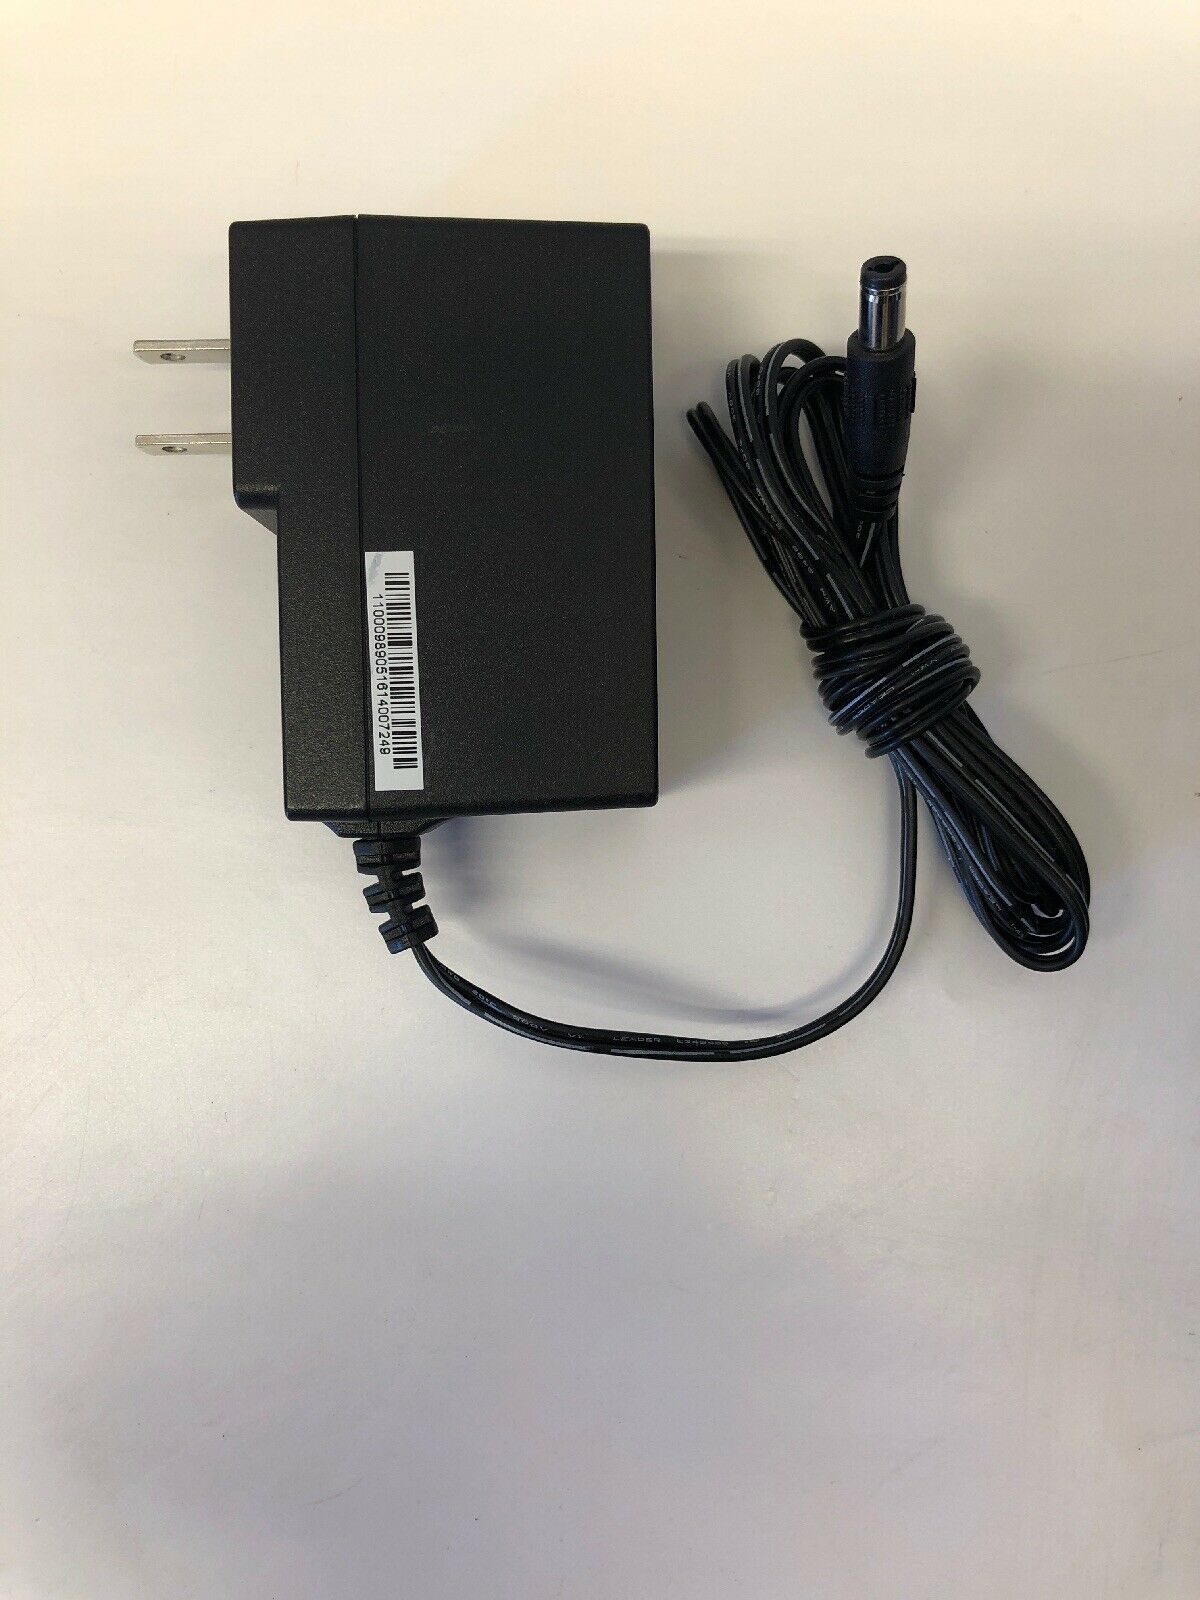 5V 2 Amp 10W compatible AC Adapter Power Supply for Cisco ATA-182 ATA-186 VoIP Type: AC/DC Adapter MPN: Does not ap